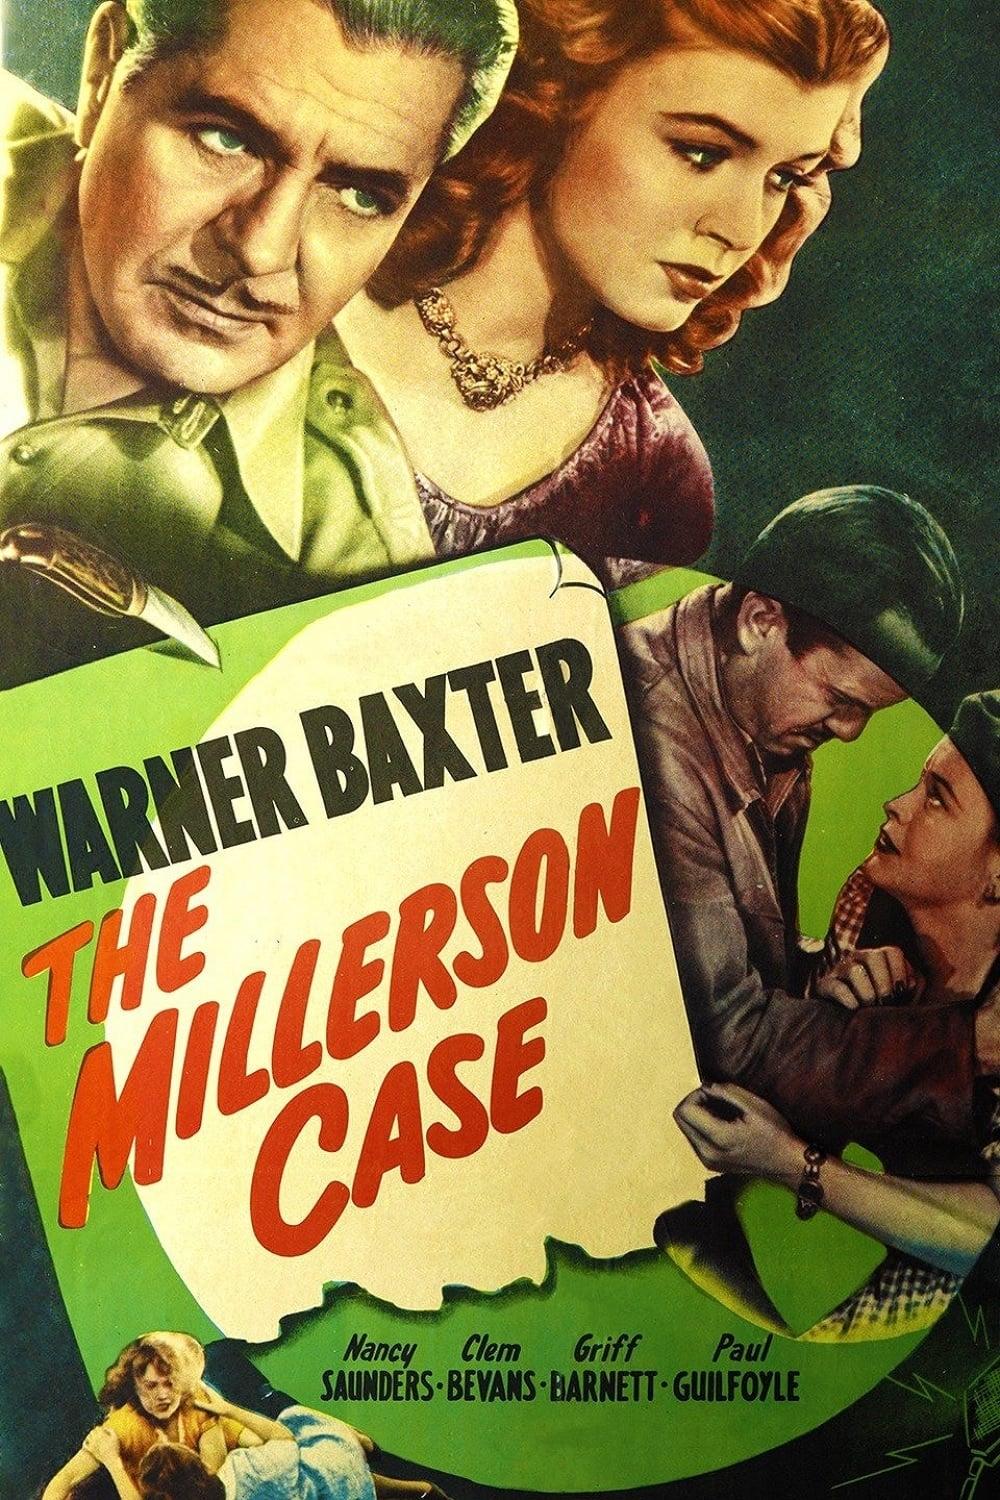 The Millerson Case poster